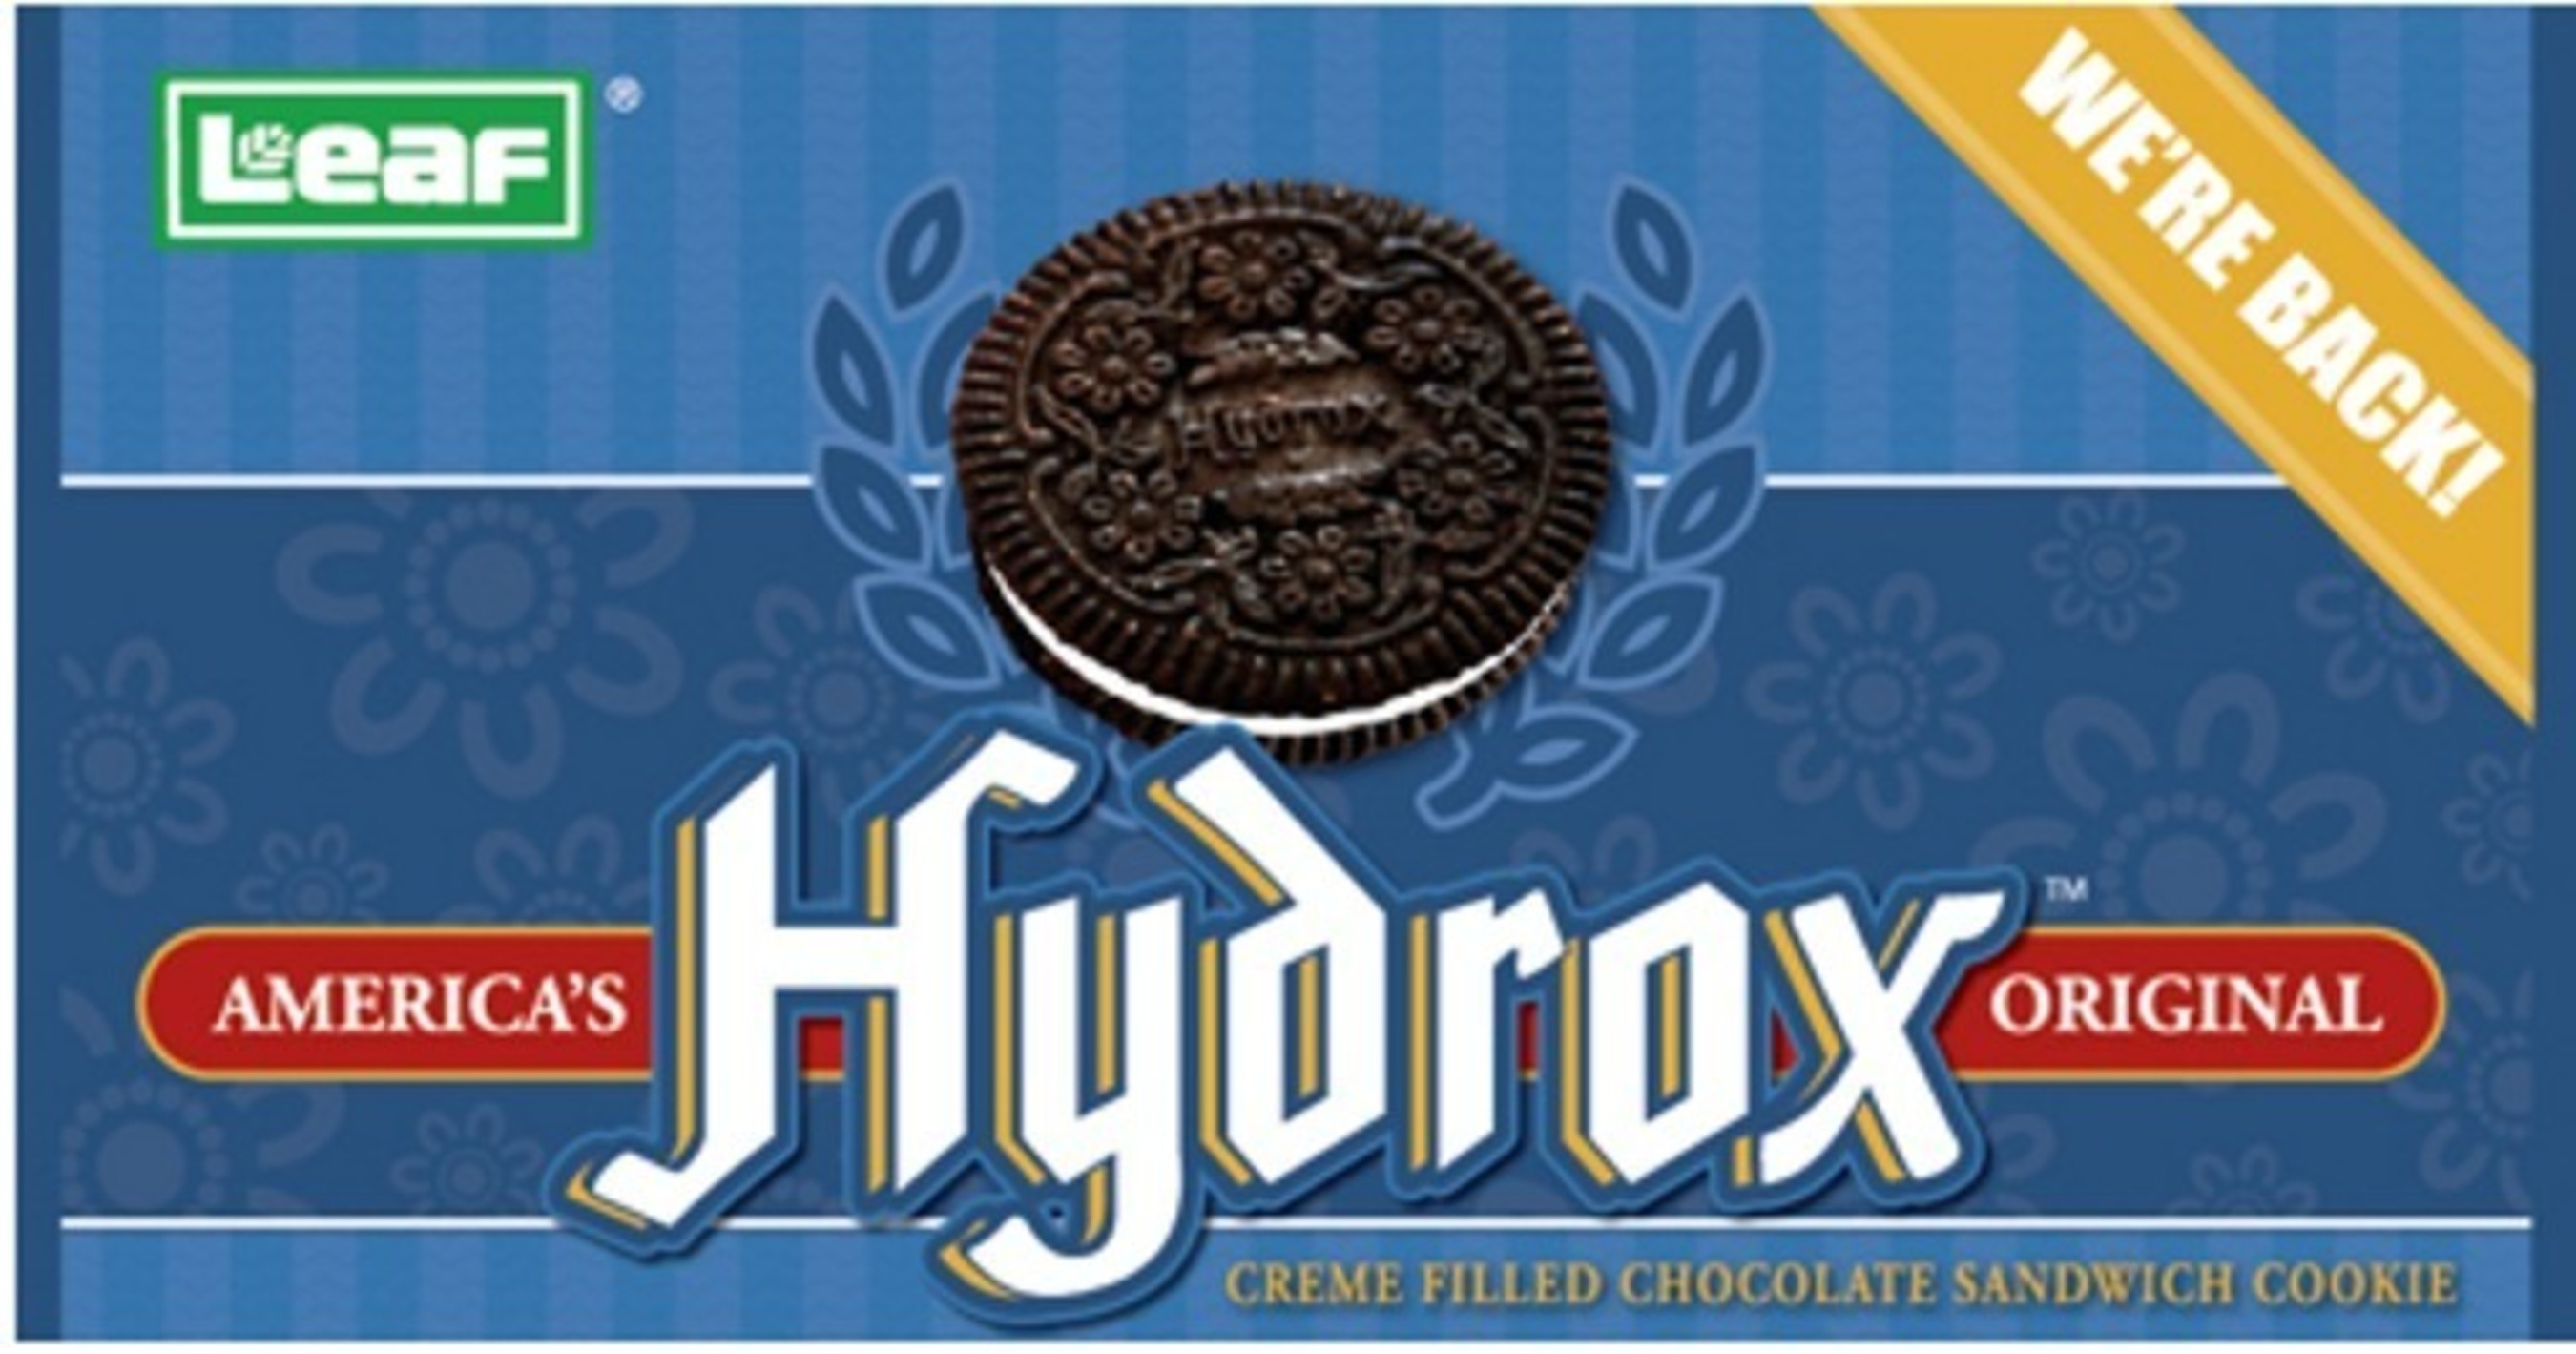 Hydrox Sandwich Cookies is the "Original Sandwich Cookie" and will be reintroduced in September. (PRNewsFoto/LEAF Brands, LLC)